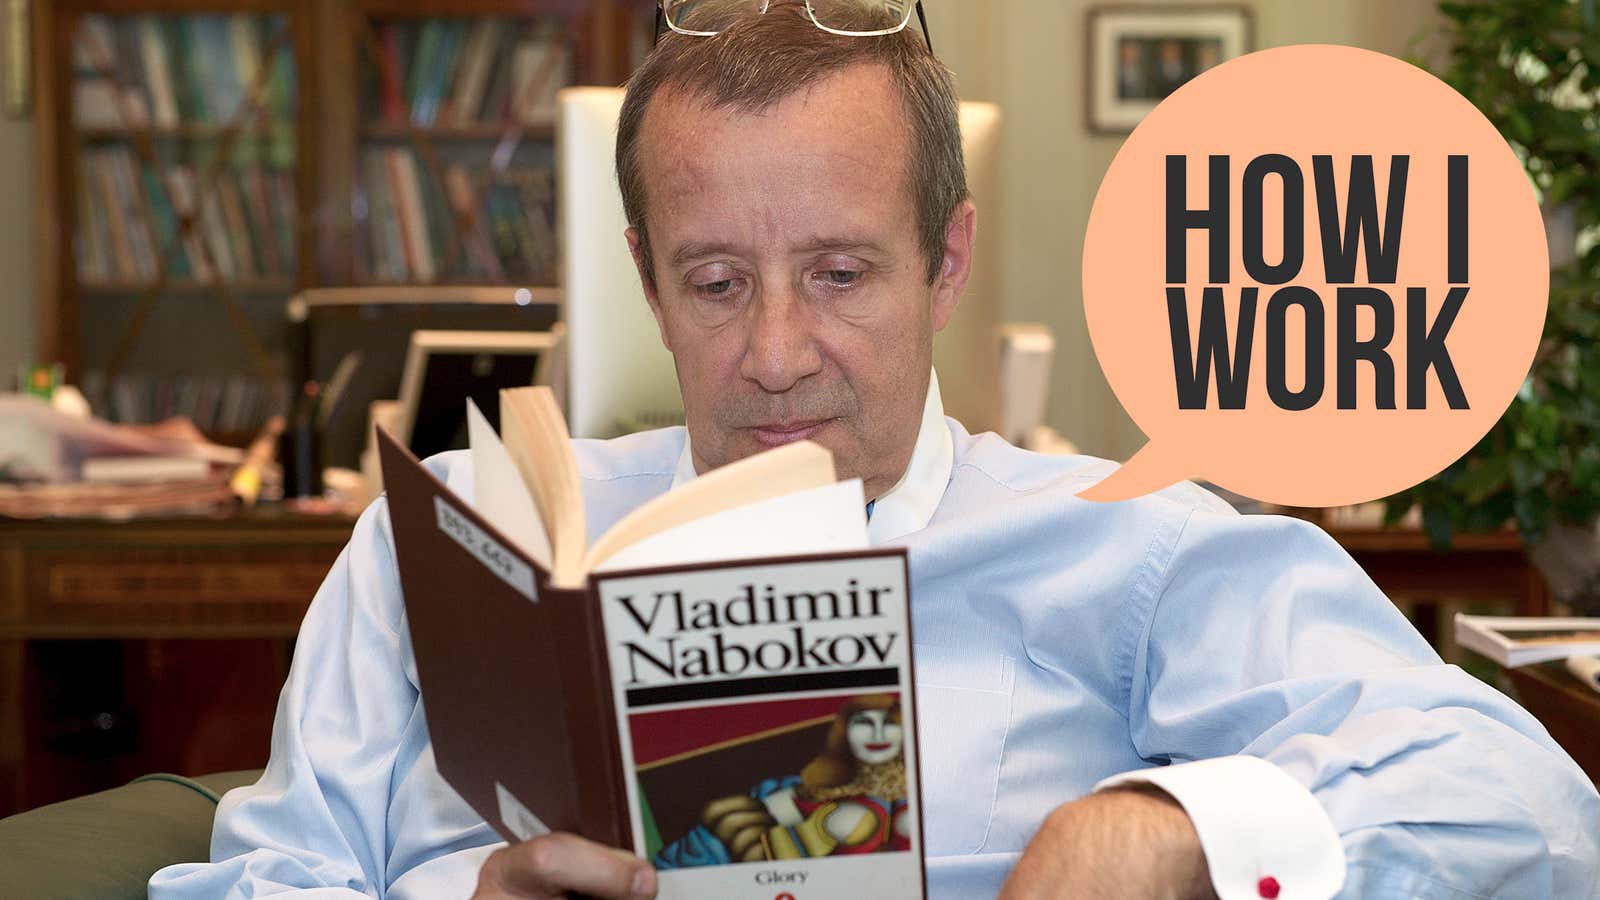 I'm Former Estonian President Toomas Hendrik Ilves, and This Is How I Work